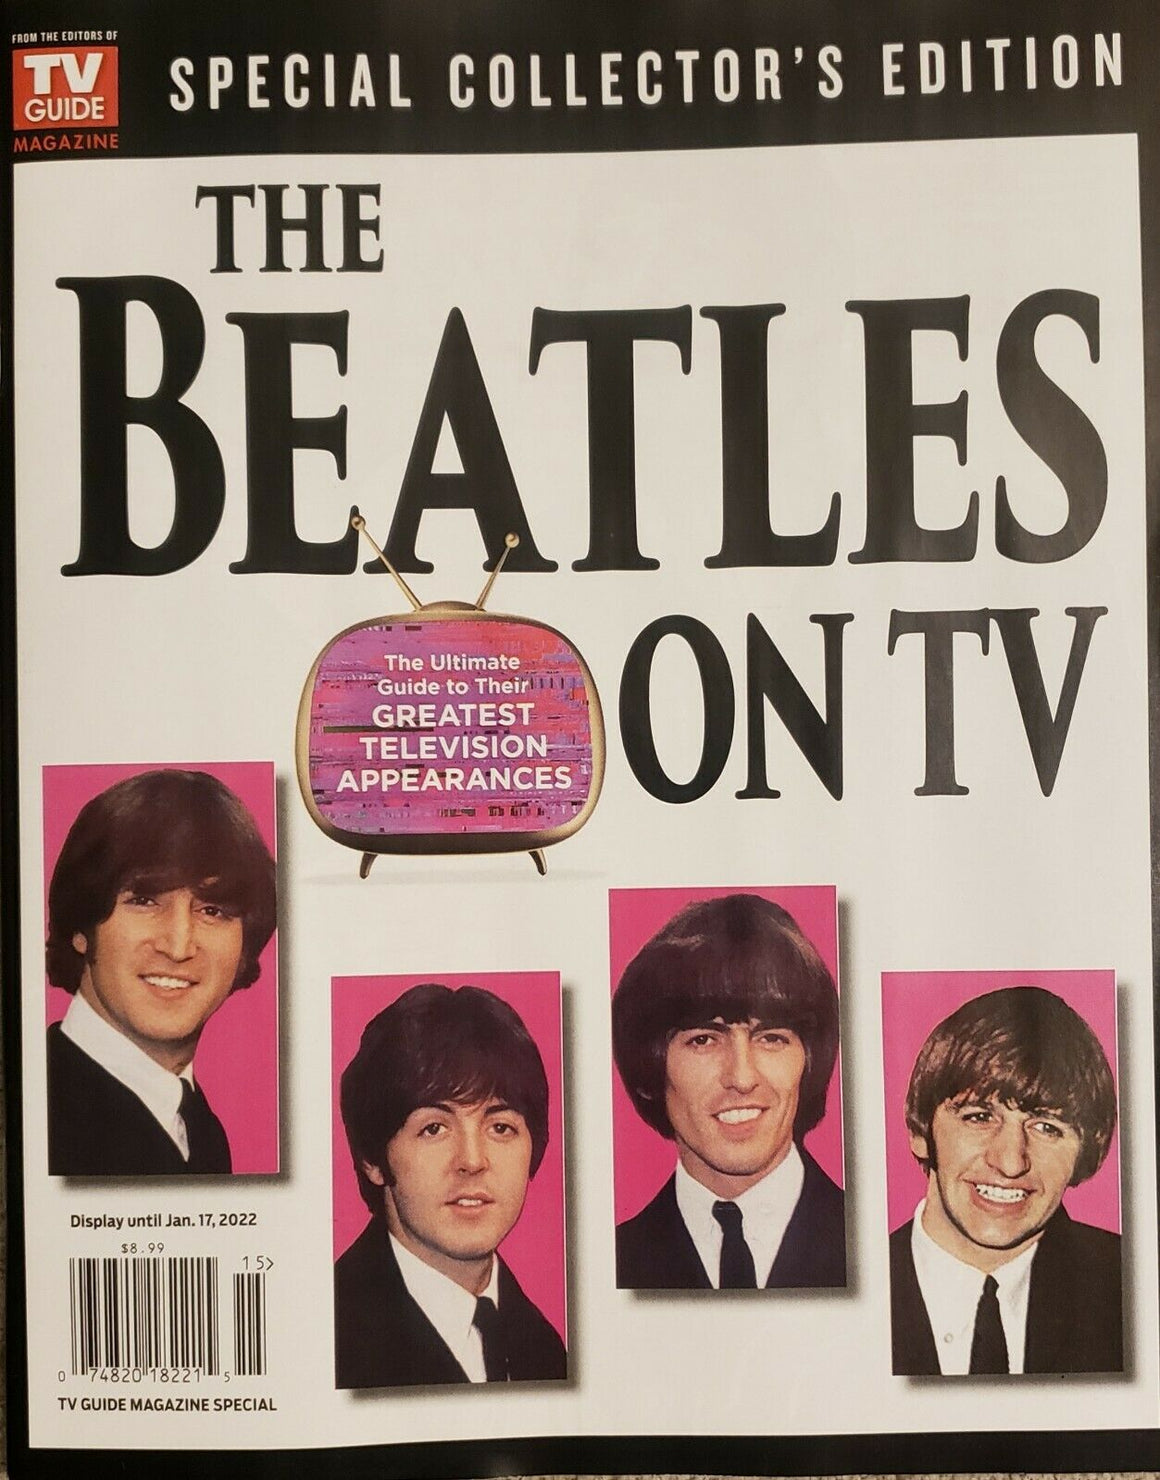 THE BEATLES - TV GUIDE SPECIAL MAGAZINE - 2021 - BRAND NEW